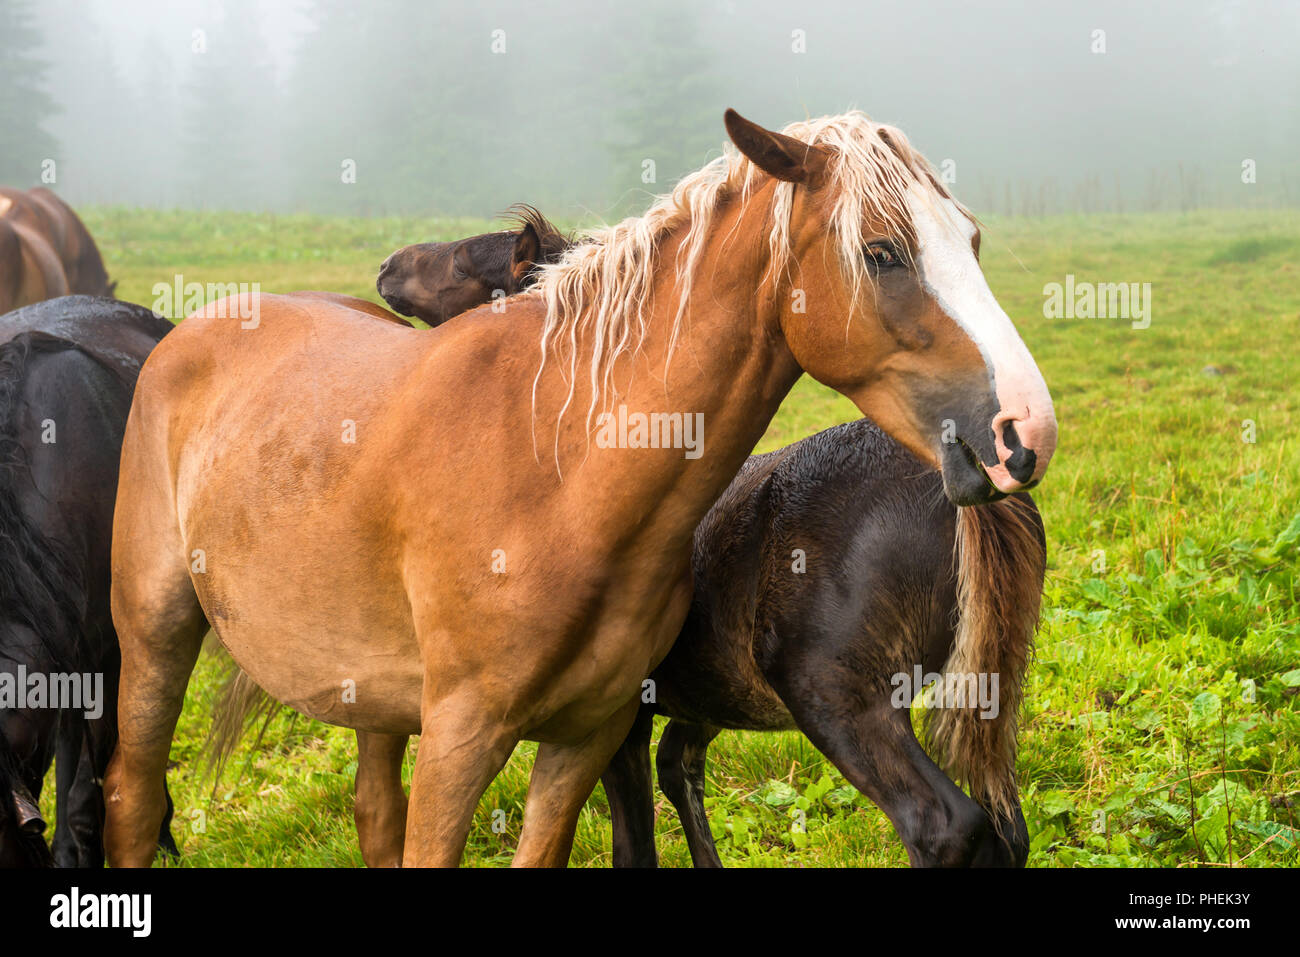 Brown chestnut horse with white mane Stock Photo